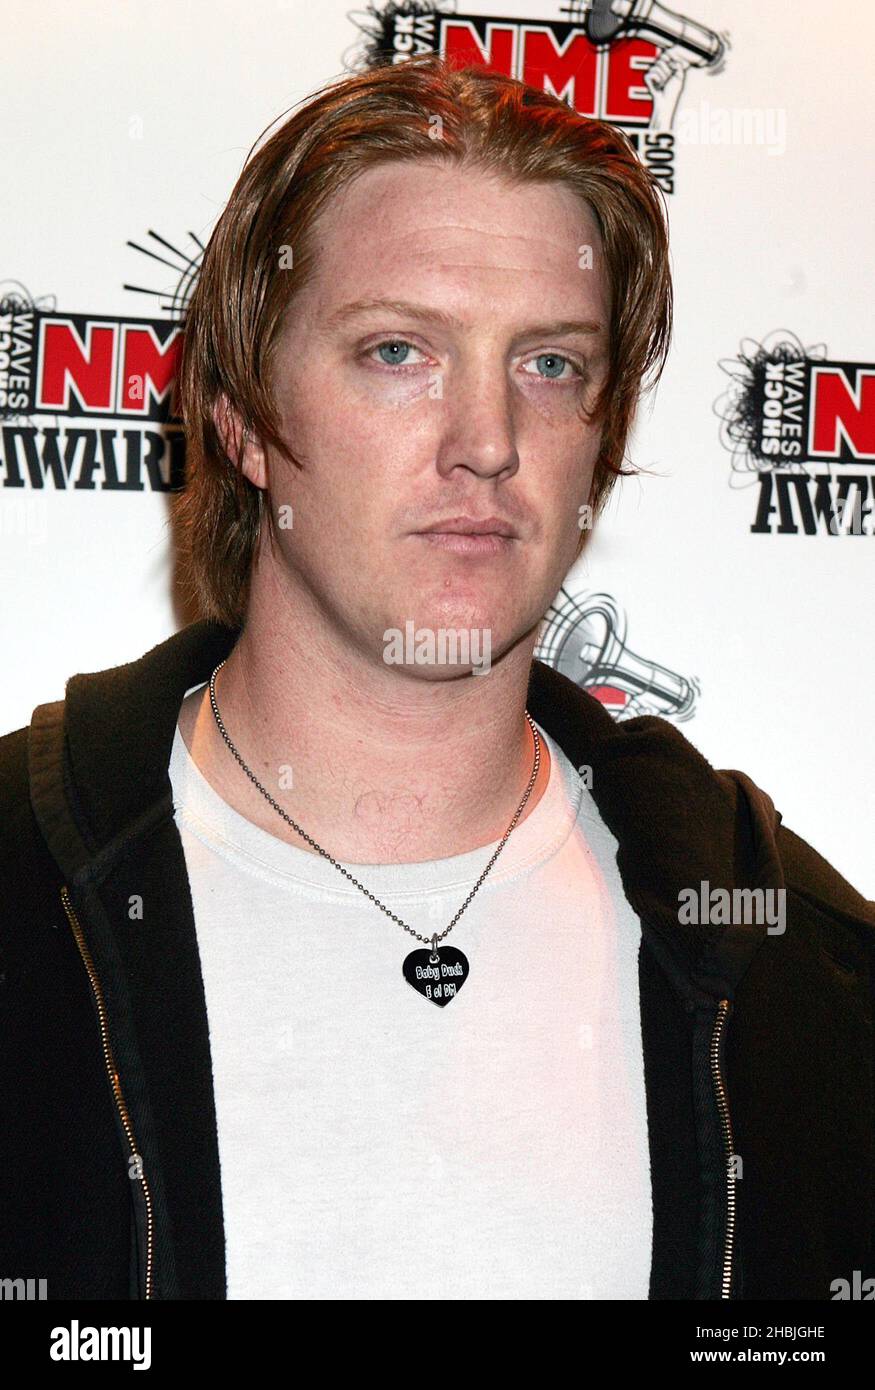 Josh Homme of Queens of the Stone Age pose at arrivals at The Shockwaves NME Awards 2005 at Hammersmith Palais on February 17, 2005 in London. Stock Photo